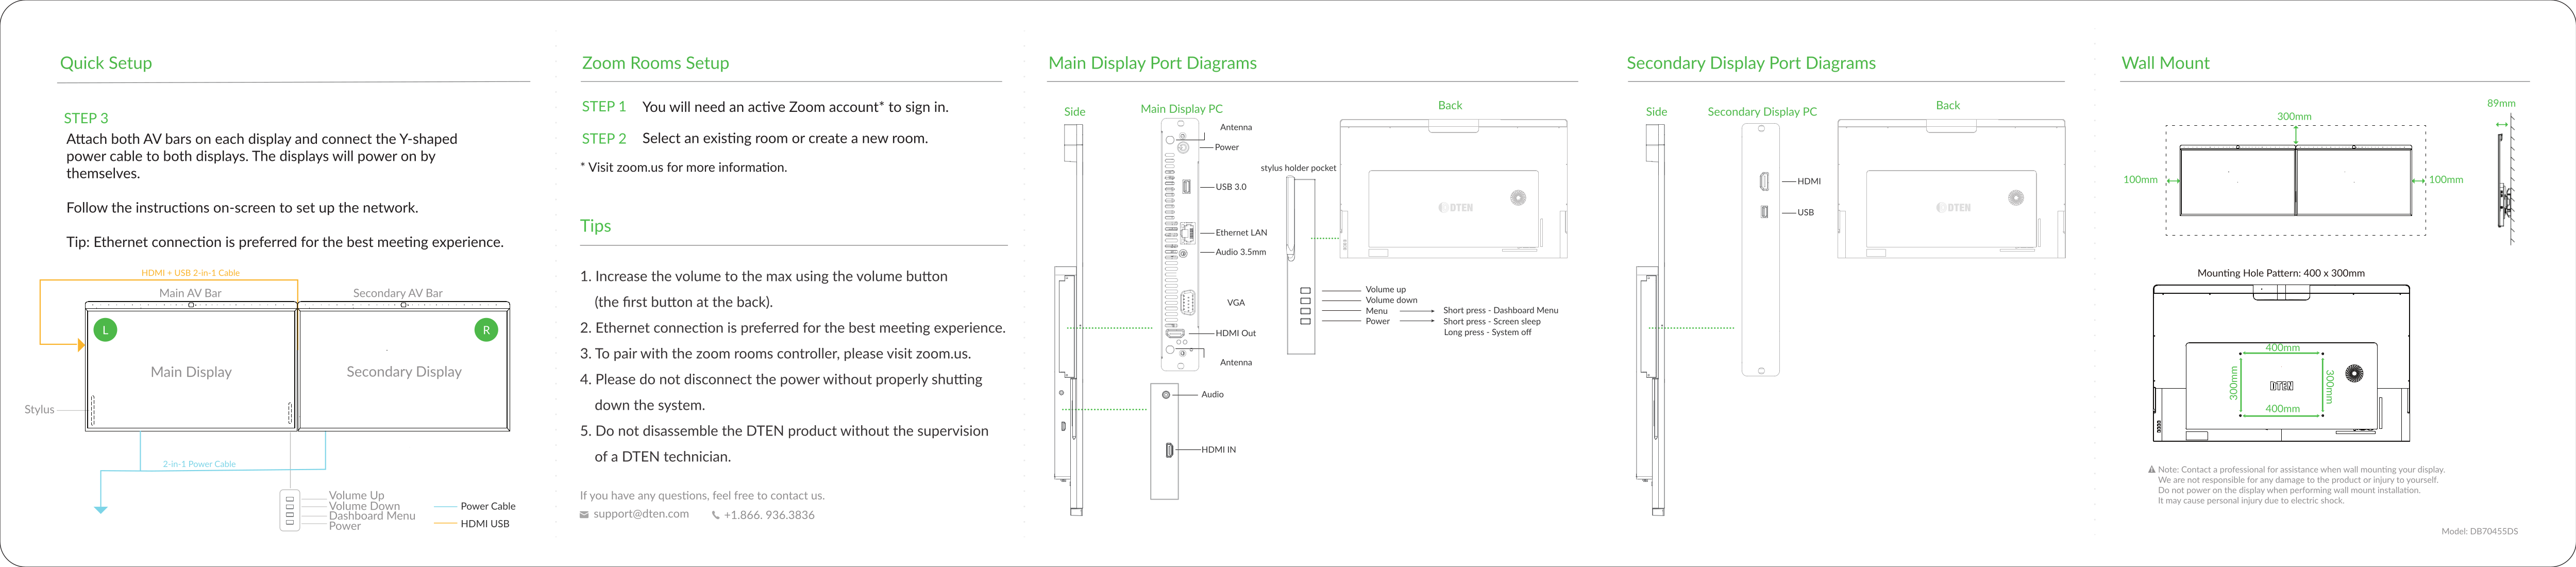 D7_55_Dual_Screen_product_guide_2021_Sep2.png